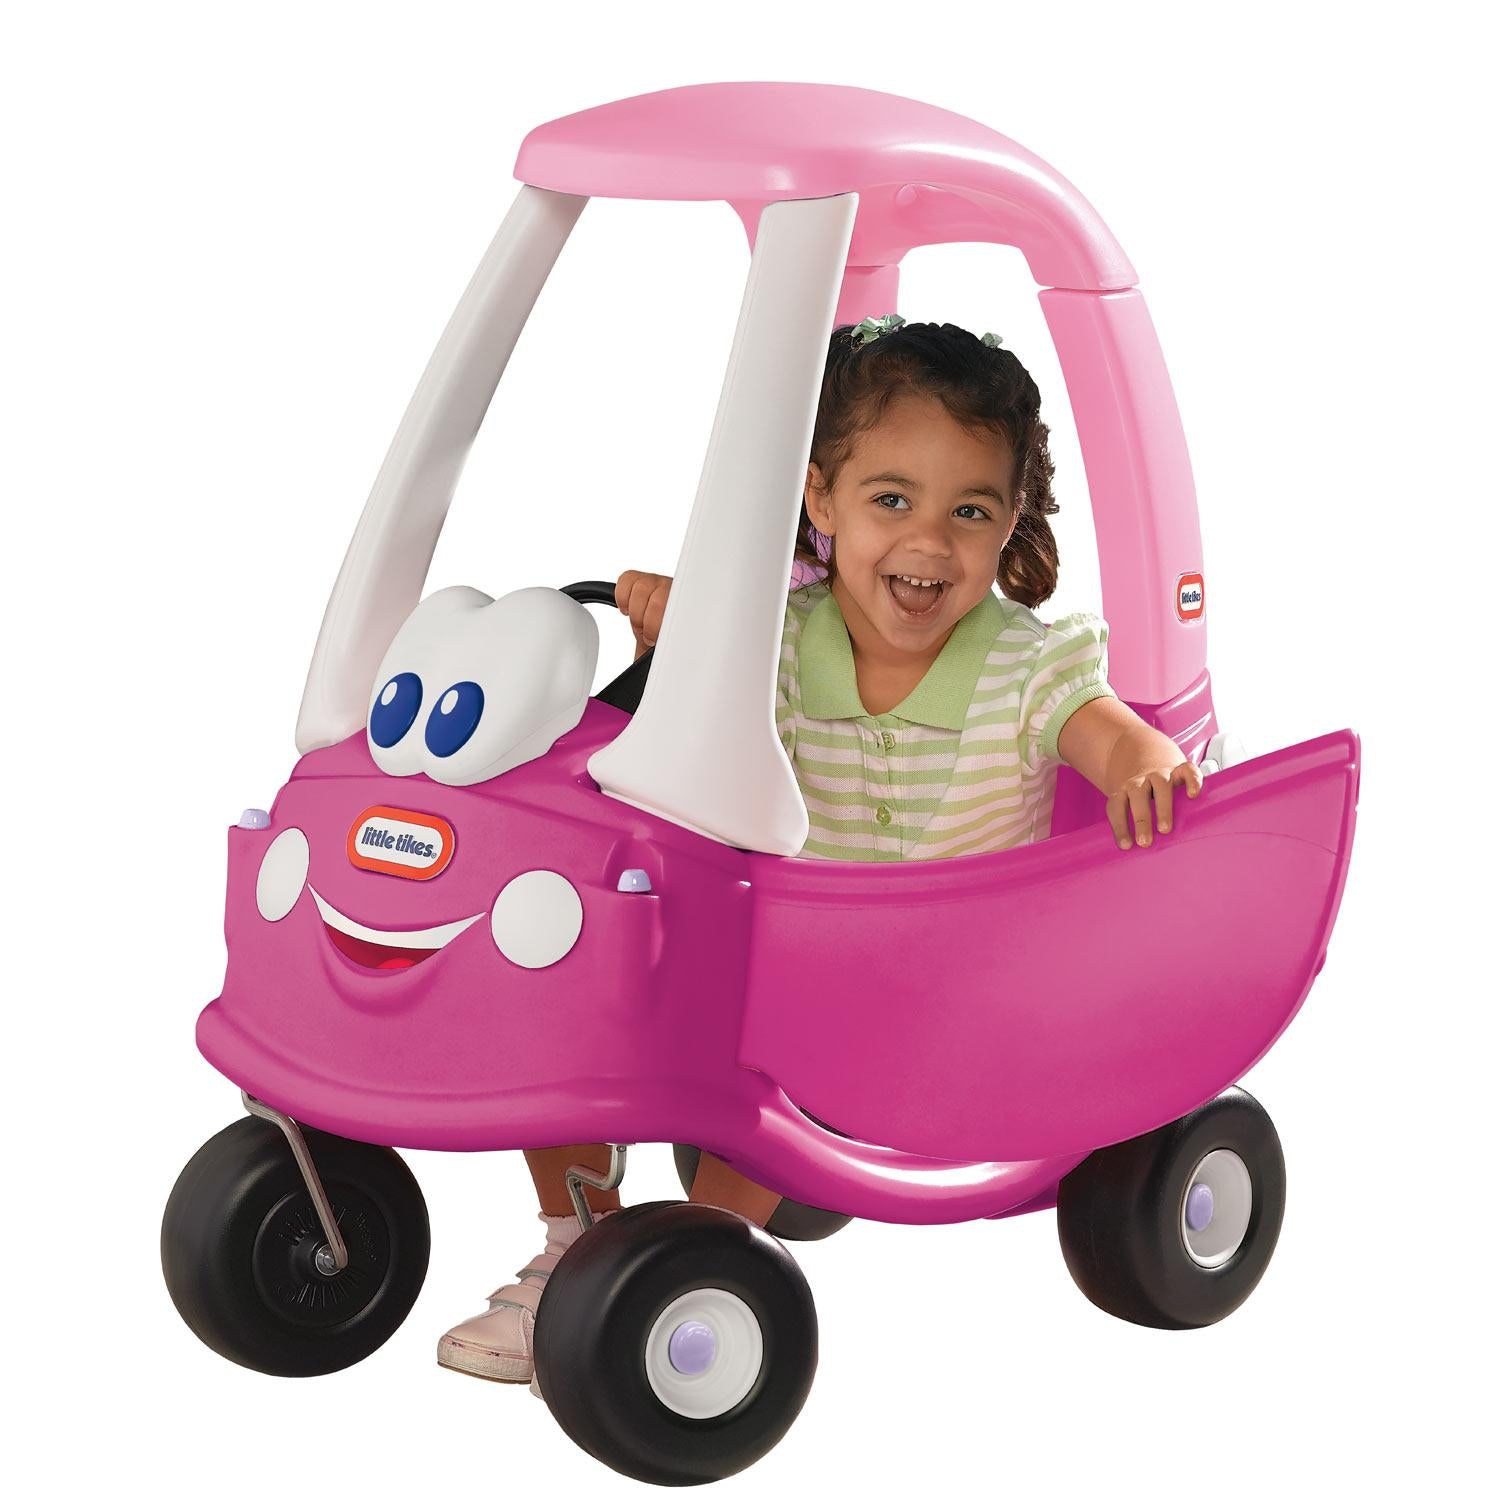 Little Tikes Toys for Babies – Official Little Tikes Website